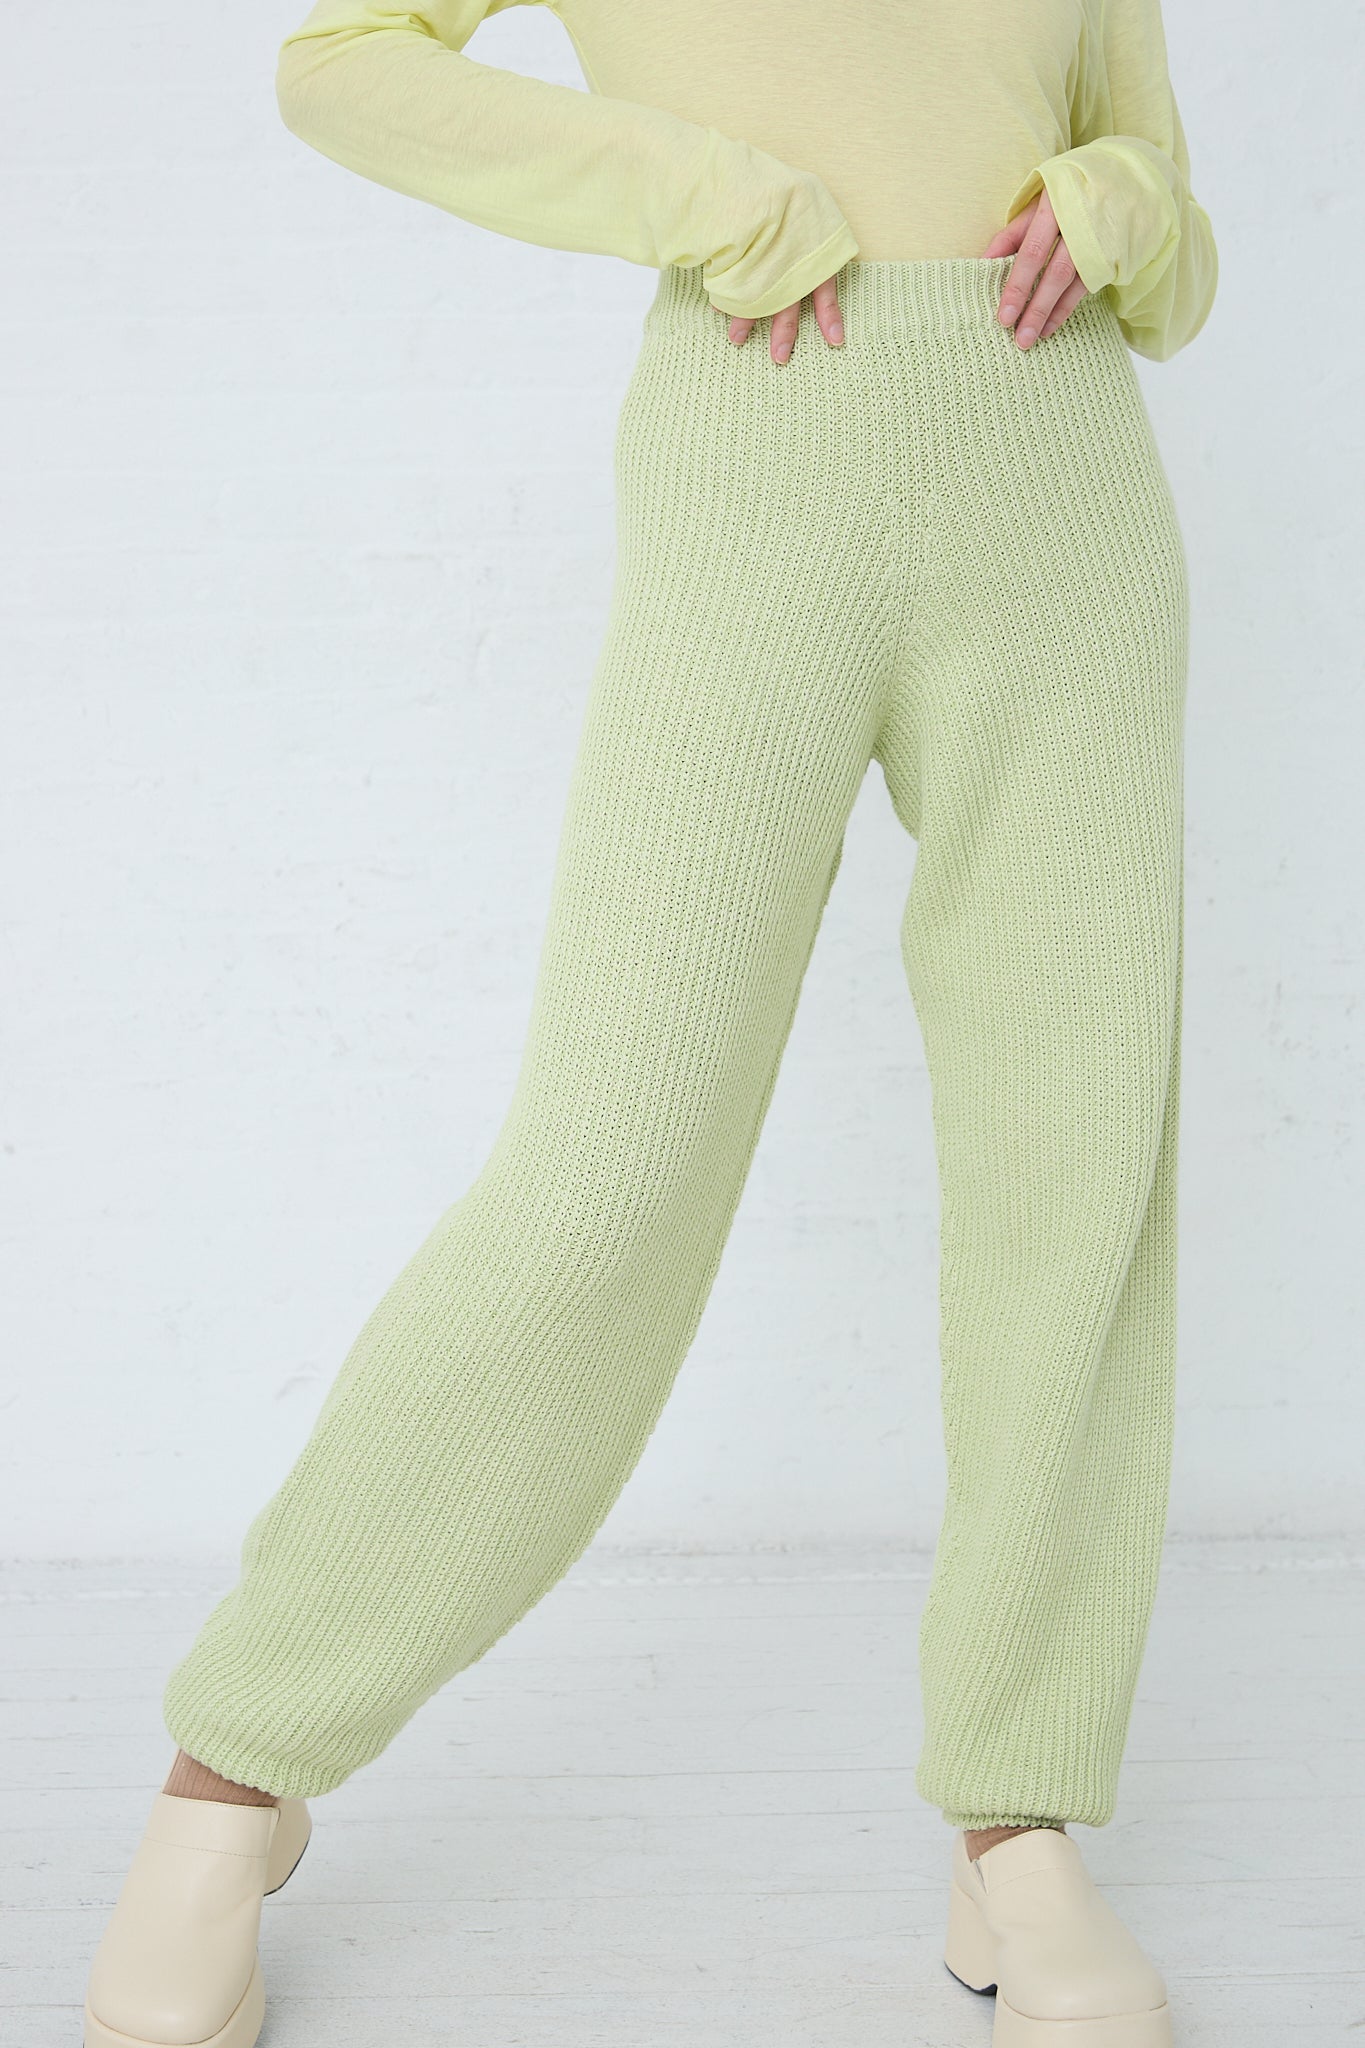 The model is wearing a sustainably produced lime sweater and green pants made from organic Cotton Dodd Pant in Mimosa by Baserange.